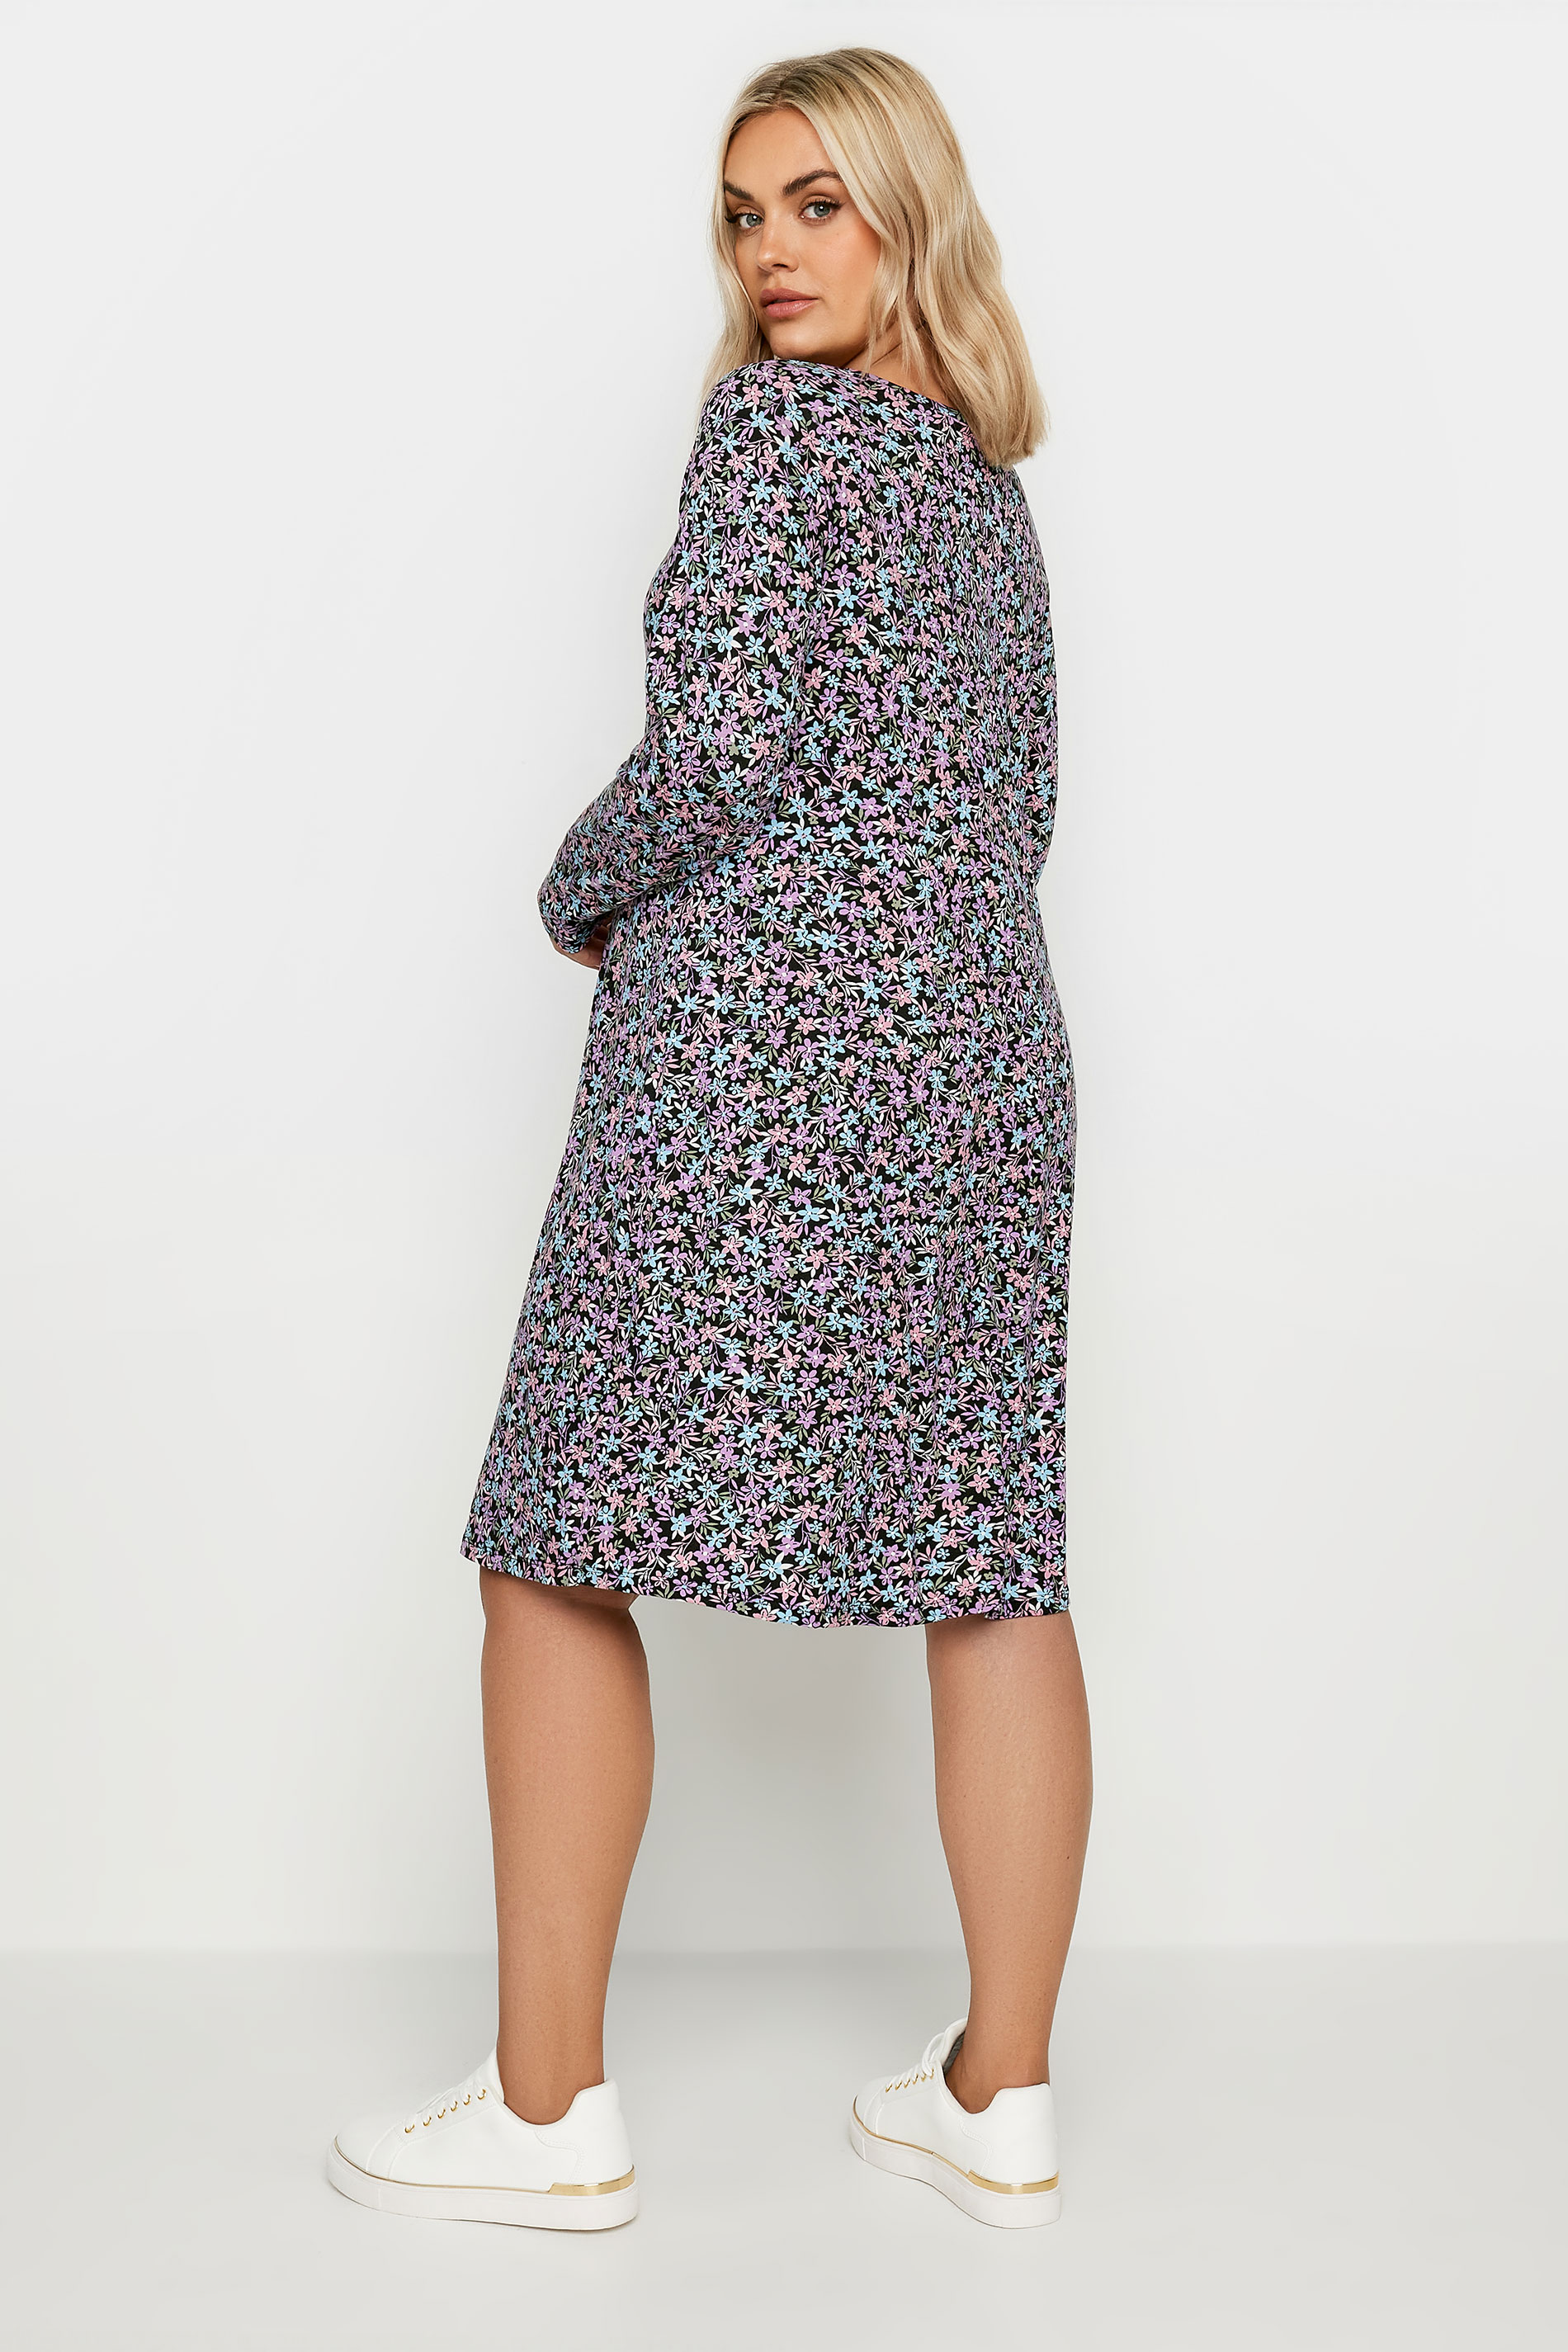 YOURS Plus Size Black Ditsy Floral Print Dress | Yours Clothing 3